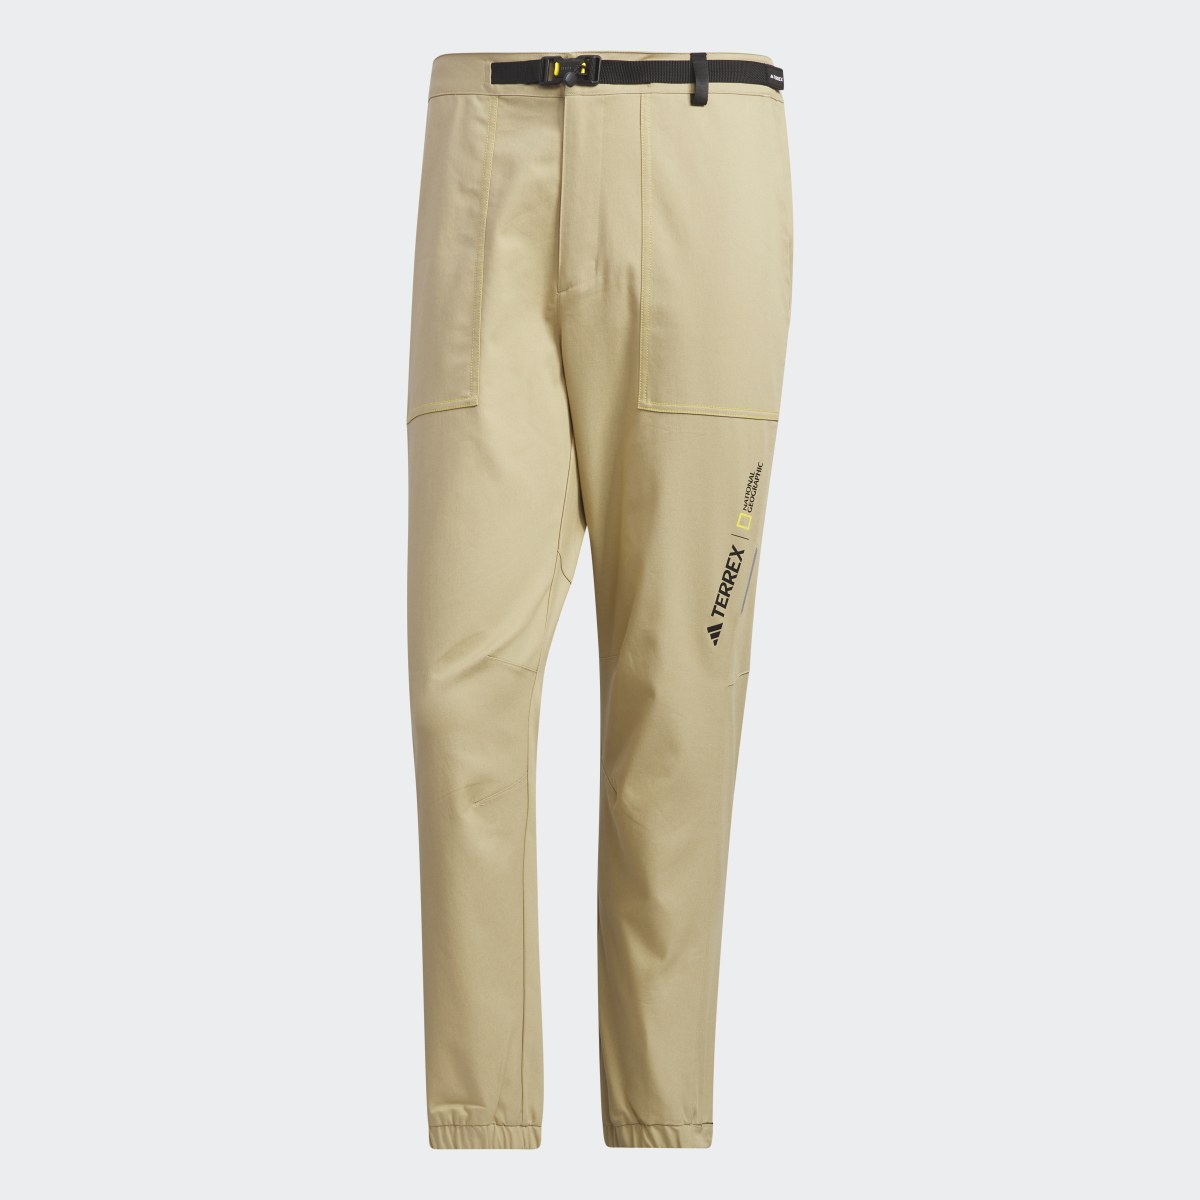 Adidas National Geographic Twill Pants. 4